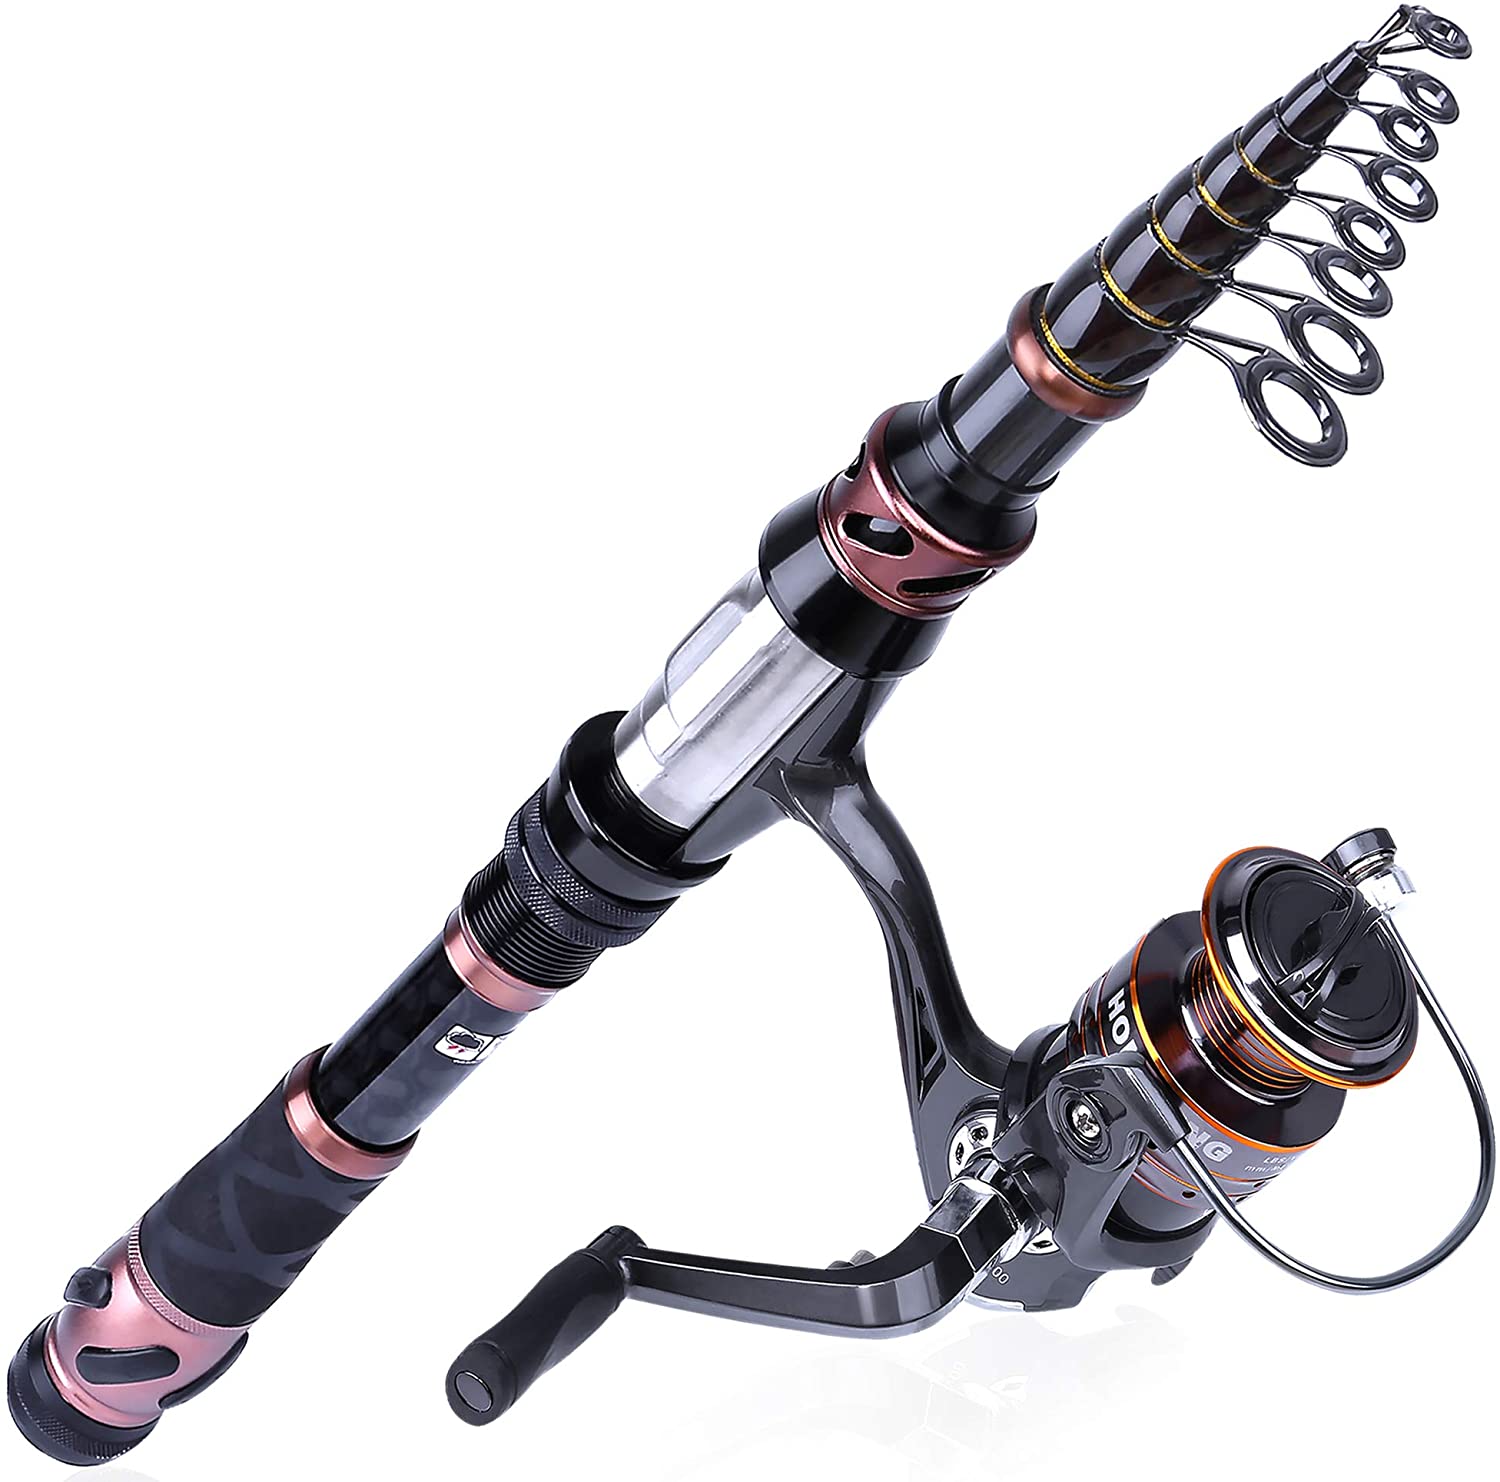 PLUSINNO Fishing Rod and Reel Combos, Toray 24Ton Carbon